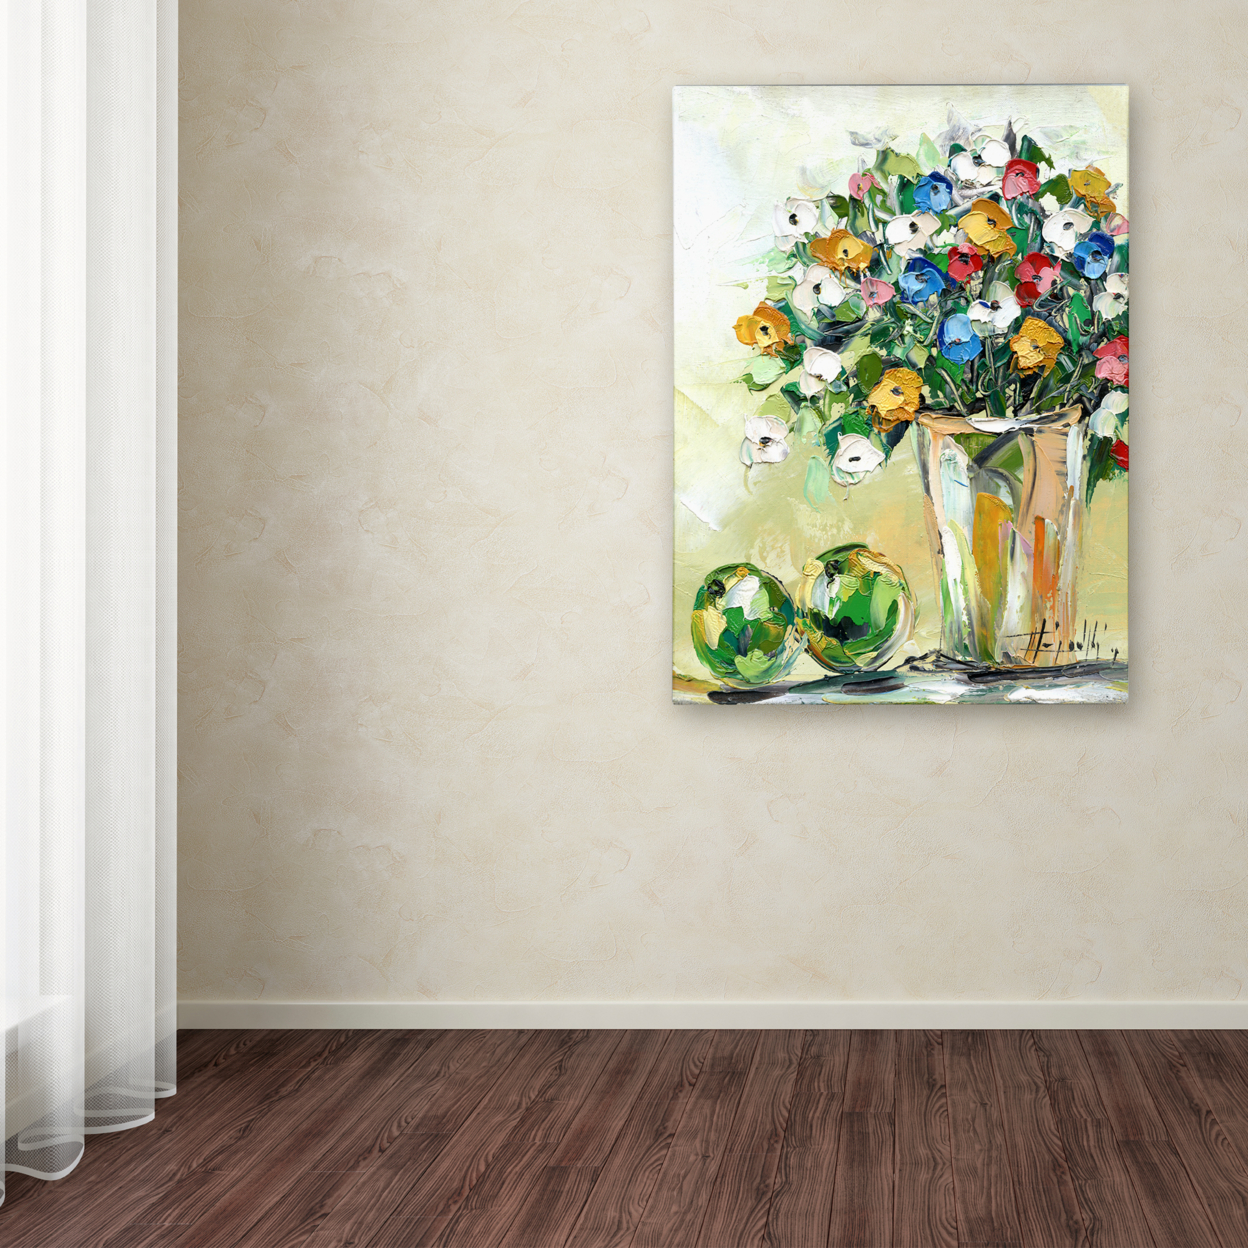 Hai Odelia 'Spring Flowers In A Vase 5' Canvas Wall Art 35 X 47 Inches